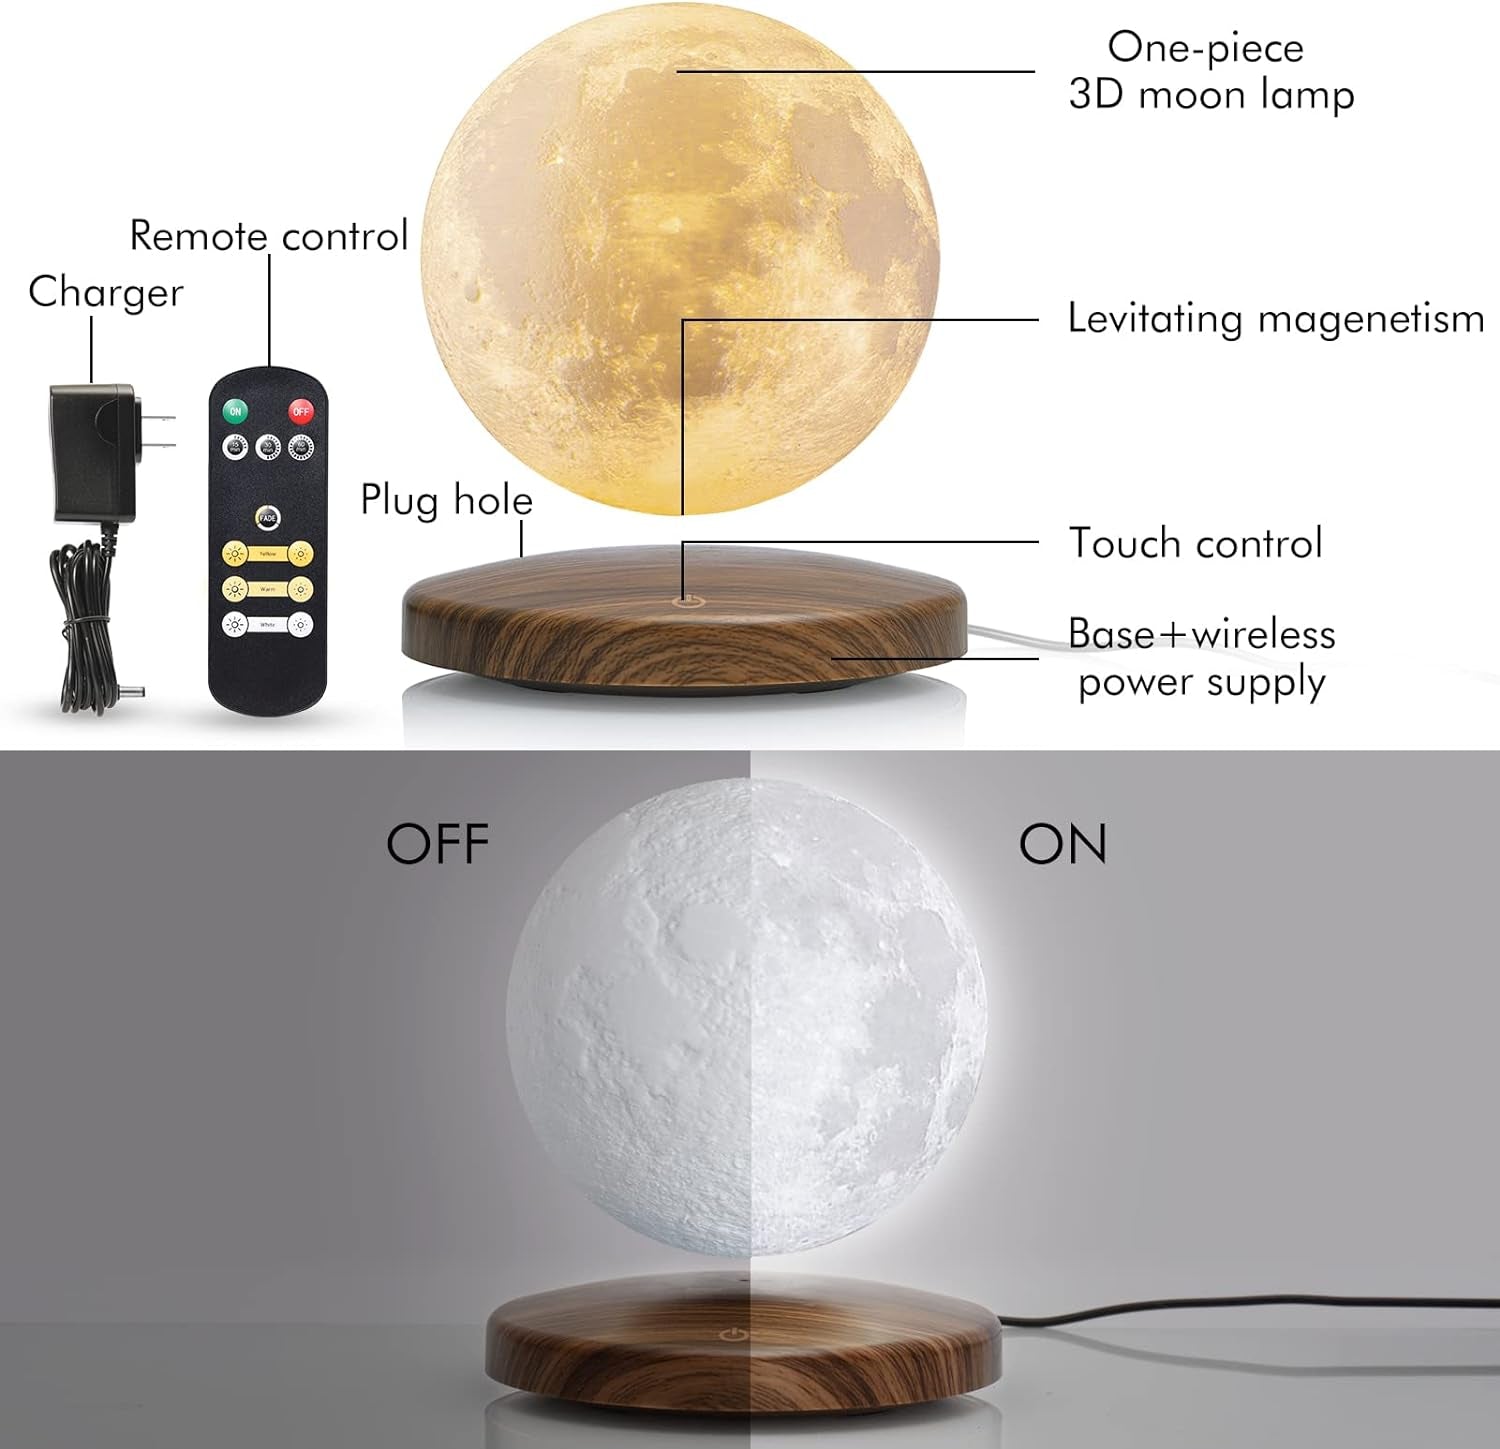 Levitating Moon Lamp 3D Printing LED Magnetic Floating Moon Light with 3 Colors Modes, Spinning in Air Freely and Best Birthday Gifts, Night Light for Home Office, Room Decor (3 Colors)